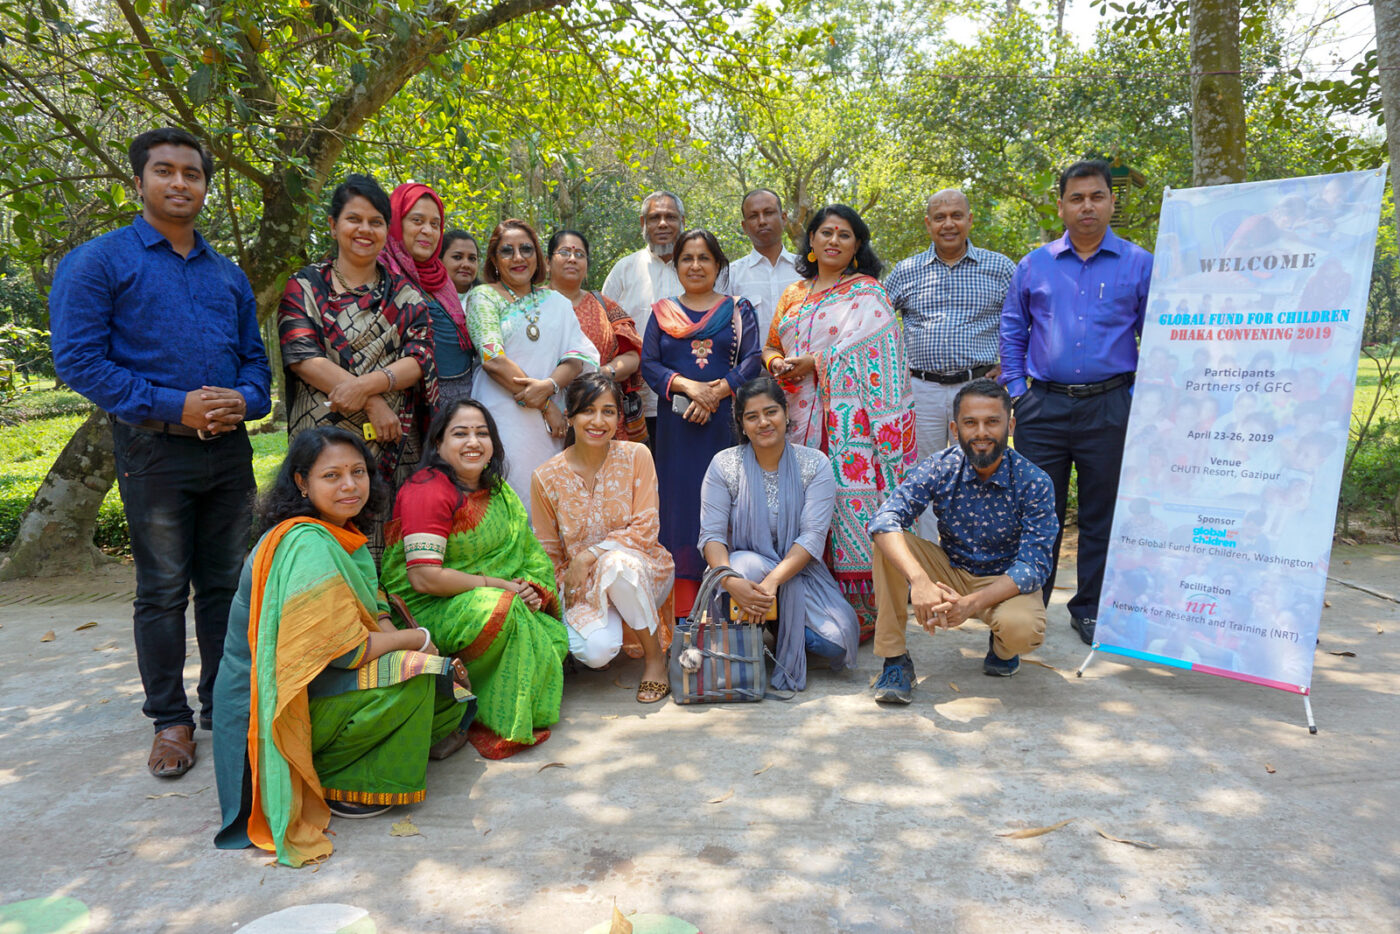 GFC partners during a convening in Dhaka